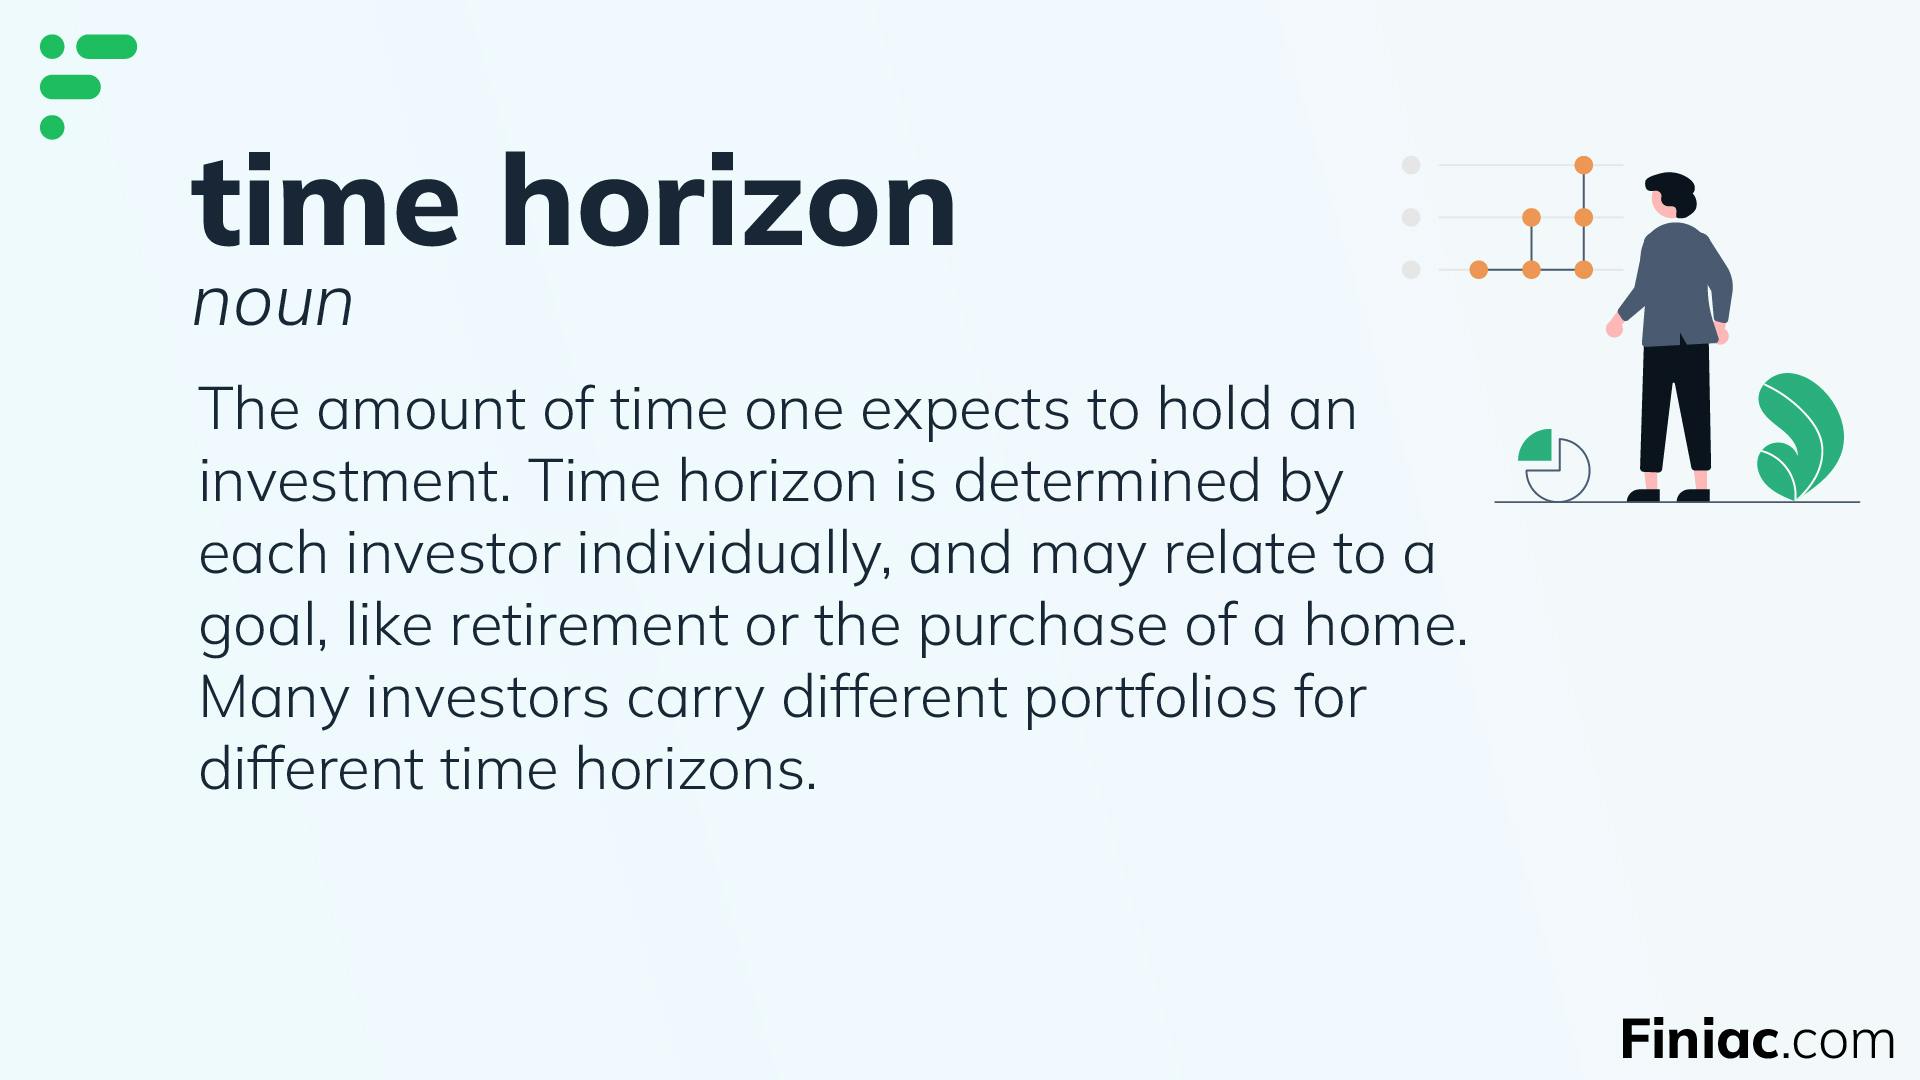 Image showing the definition of the term "time horizon" in investing.